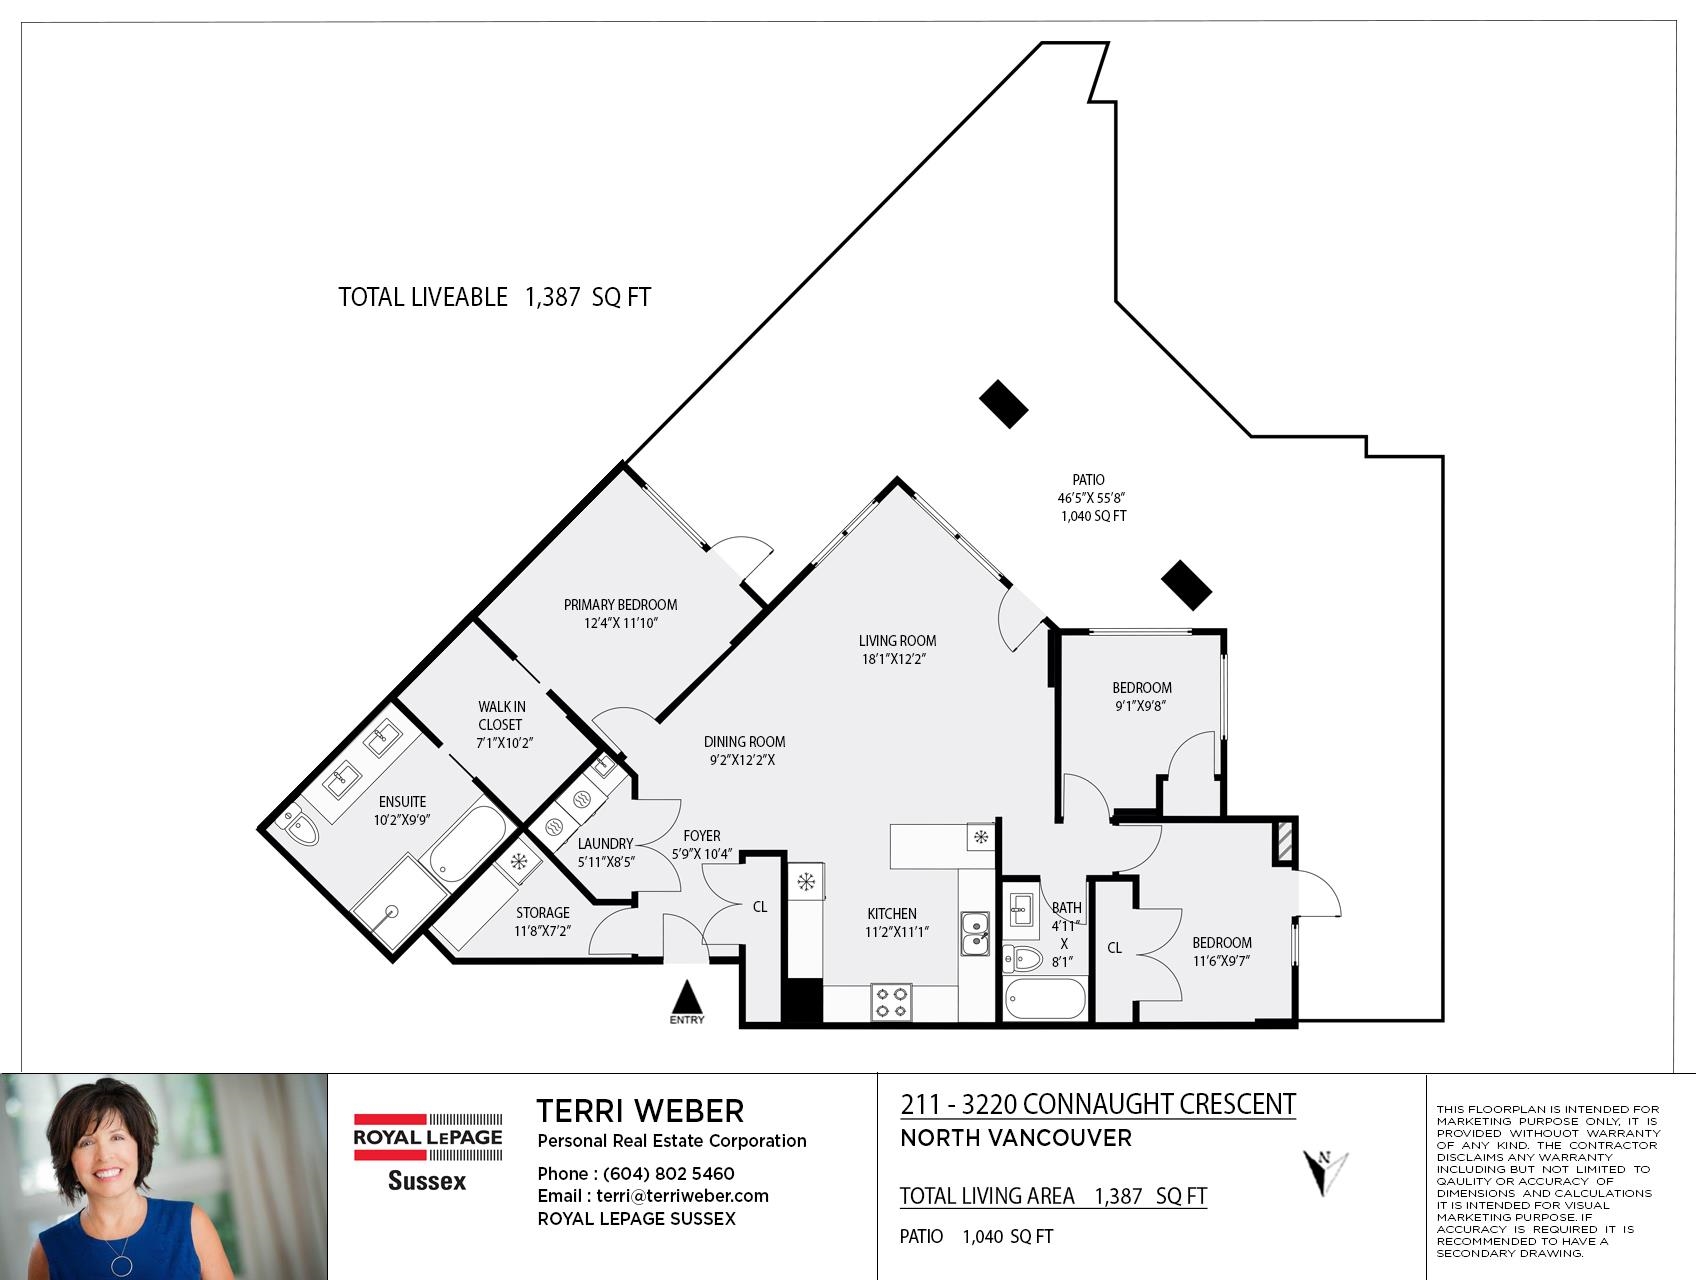 Listing image of 211 3220 CONNAUGHT CRESCENT